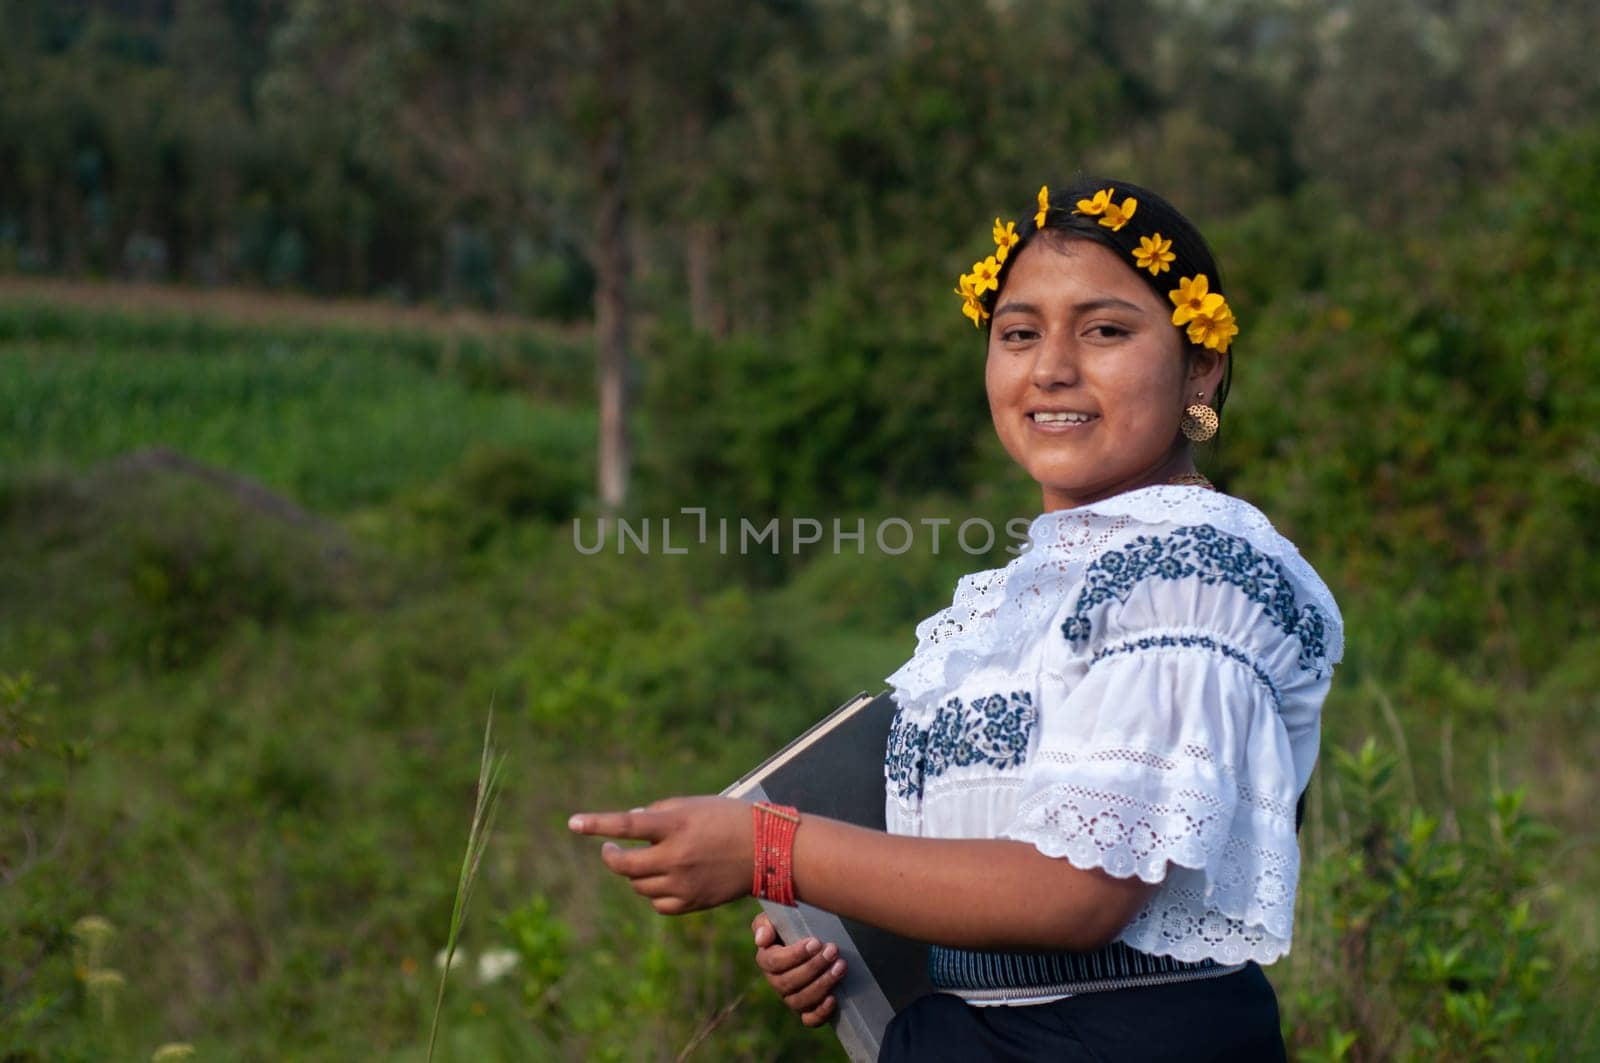 copy space de A cheerful Indian woman with yellow flowers in her hair poses for a photograph with a book in her hand. book day. springtime by Raulmartin